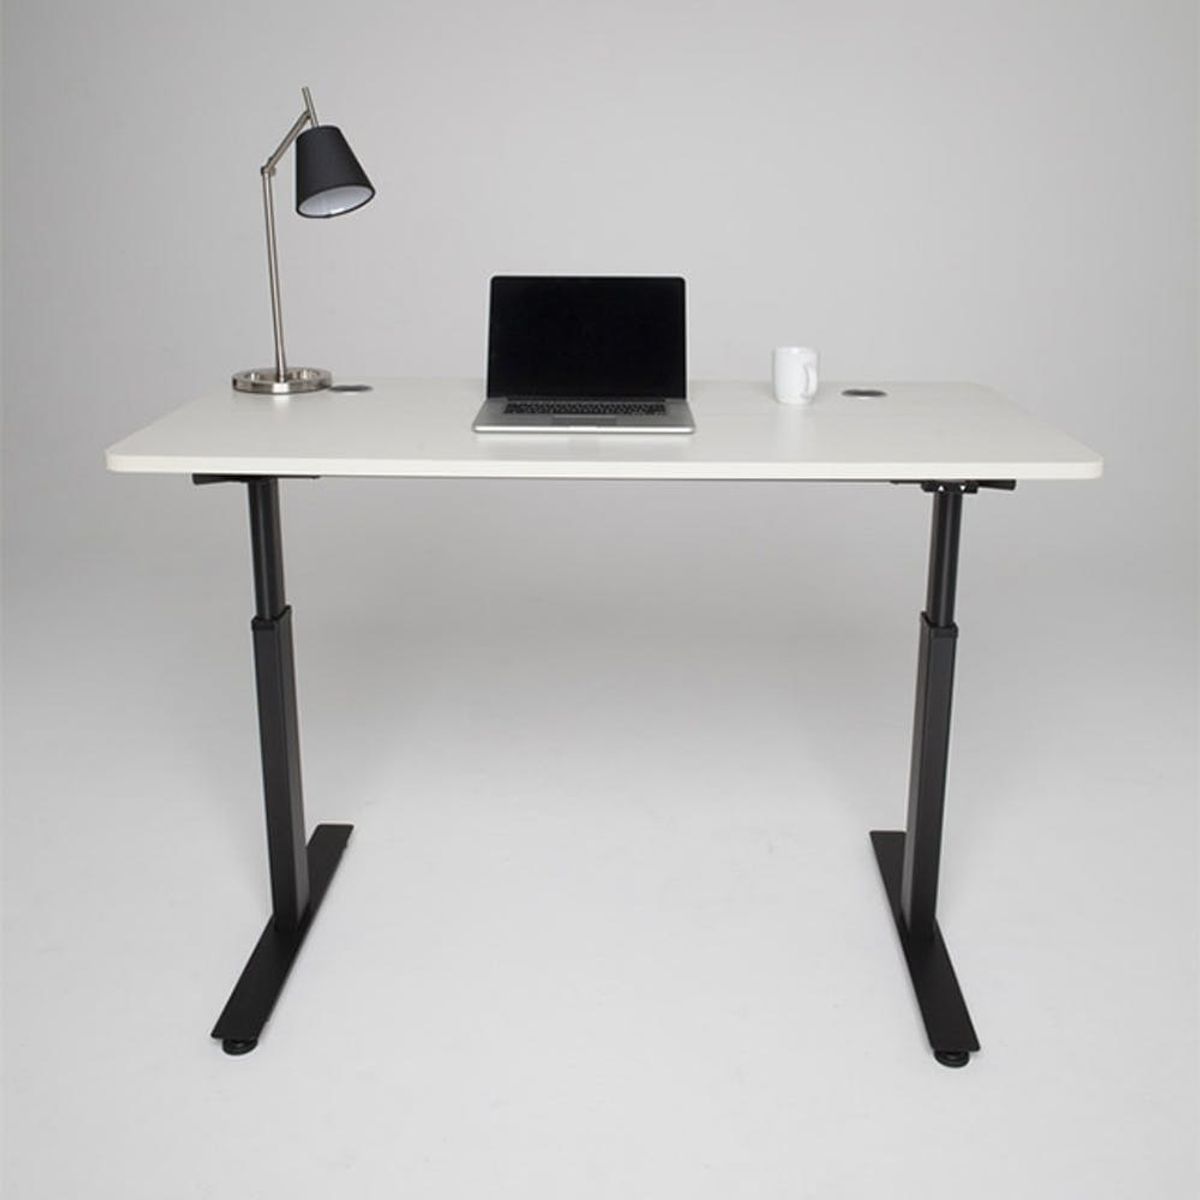 The Most Affordable Automatic Standing Desk Ever